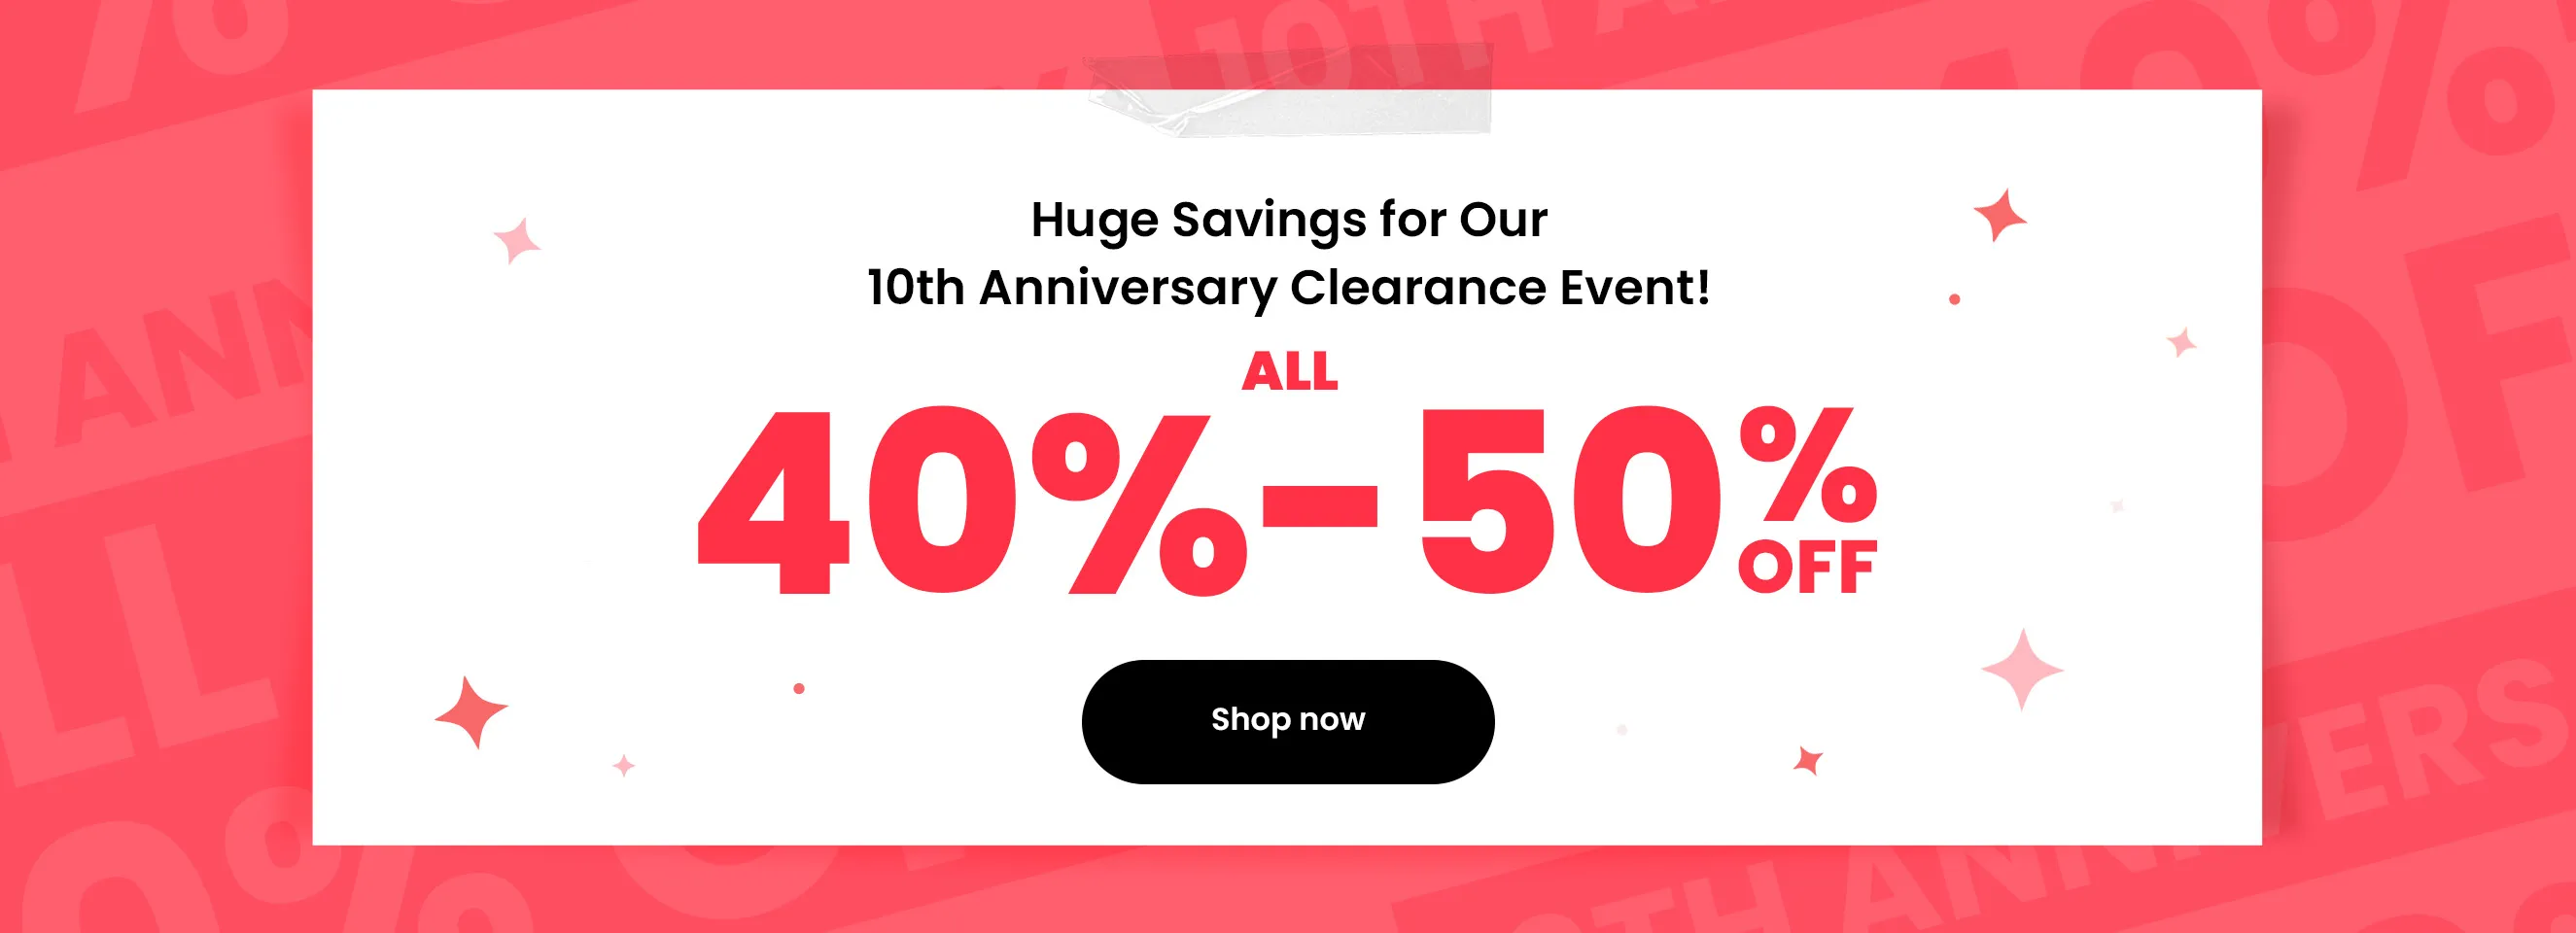 Click it to join 10th Anniversary Clearance activity